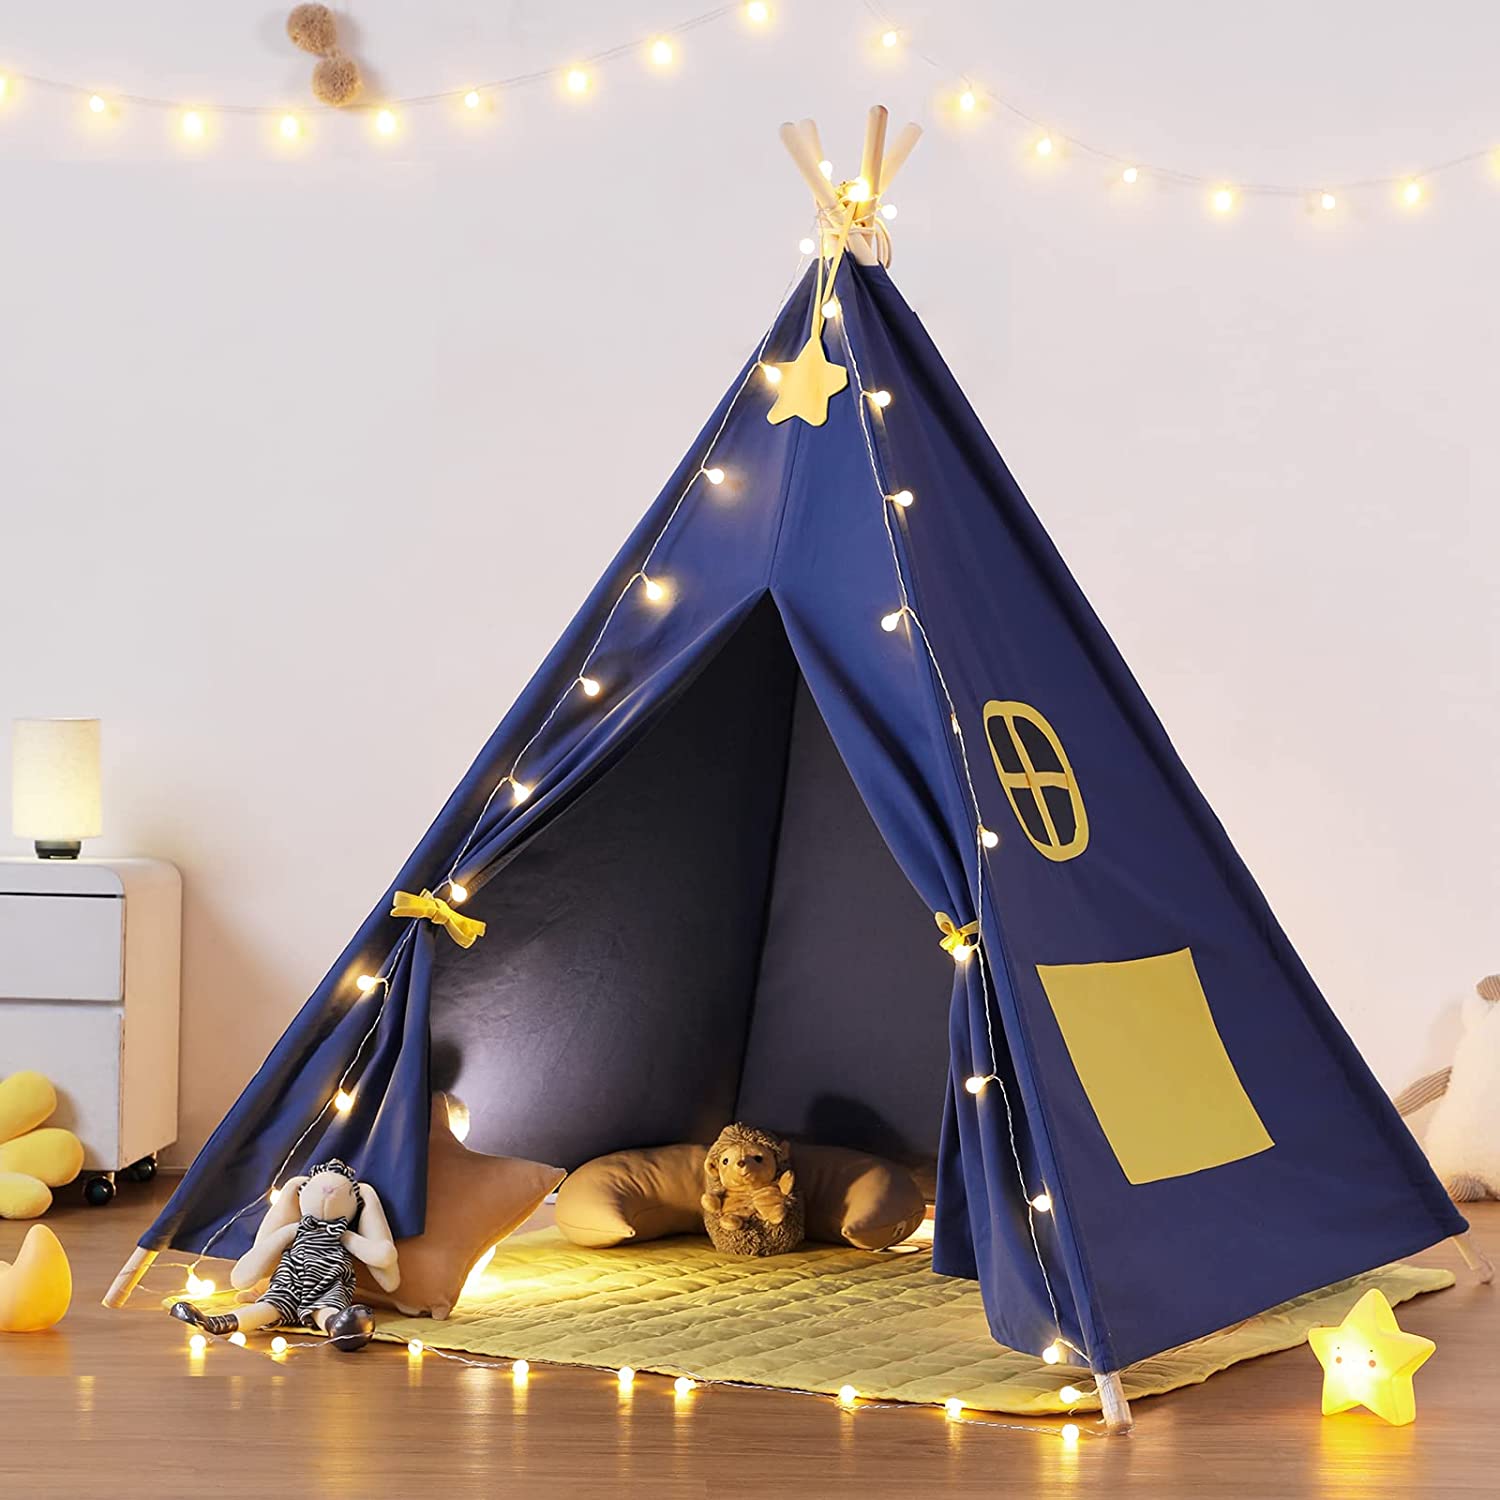 besrey Kids Teepee Tent, Boys Teepee Indoor, Room Tipee Tent Indoor, Child Toddler Reading Tent Large, Cotton Canvas Play Tent with Padded Mat and String Lights, for Boys and Girls (Blue)